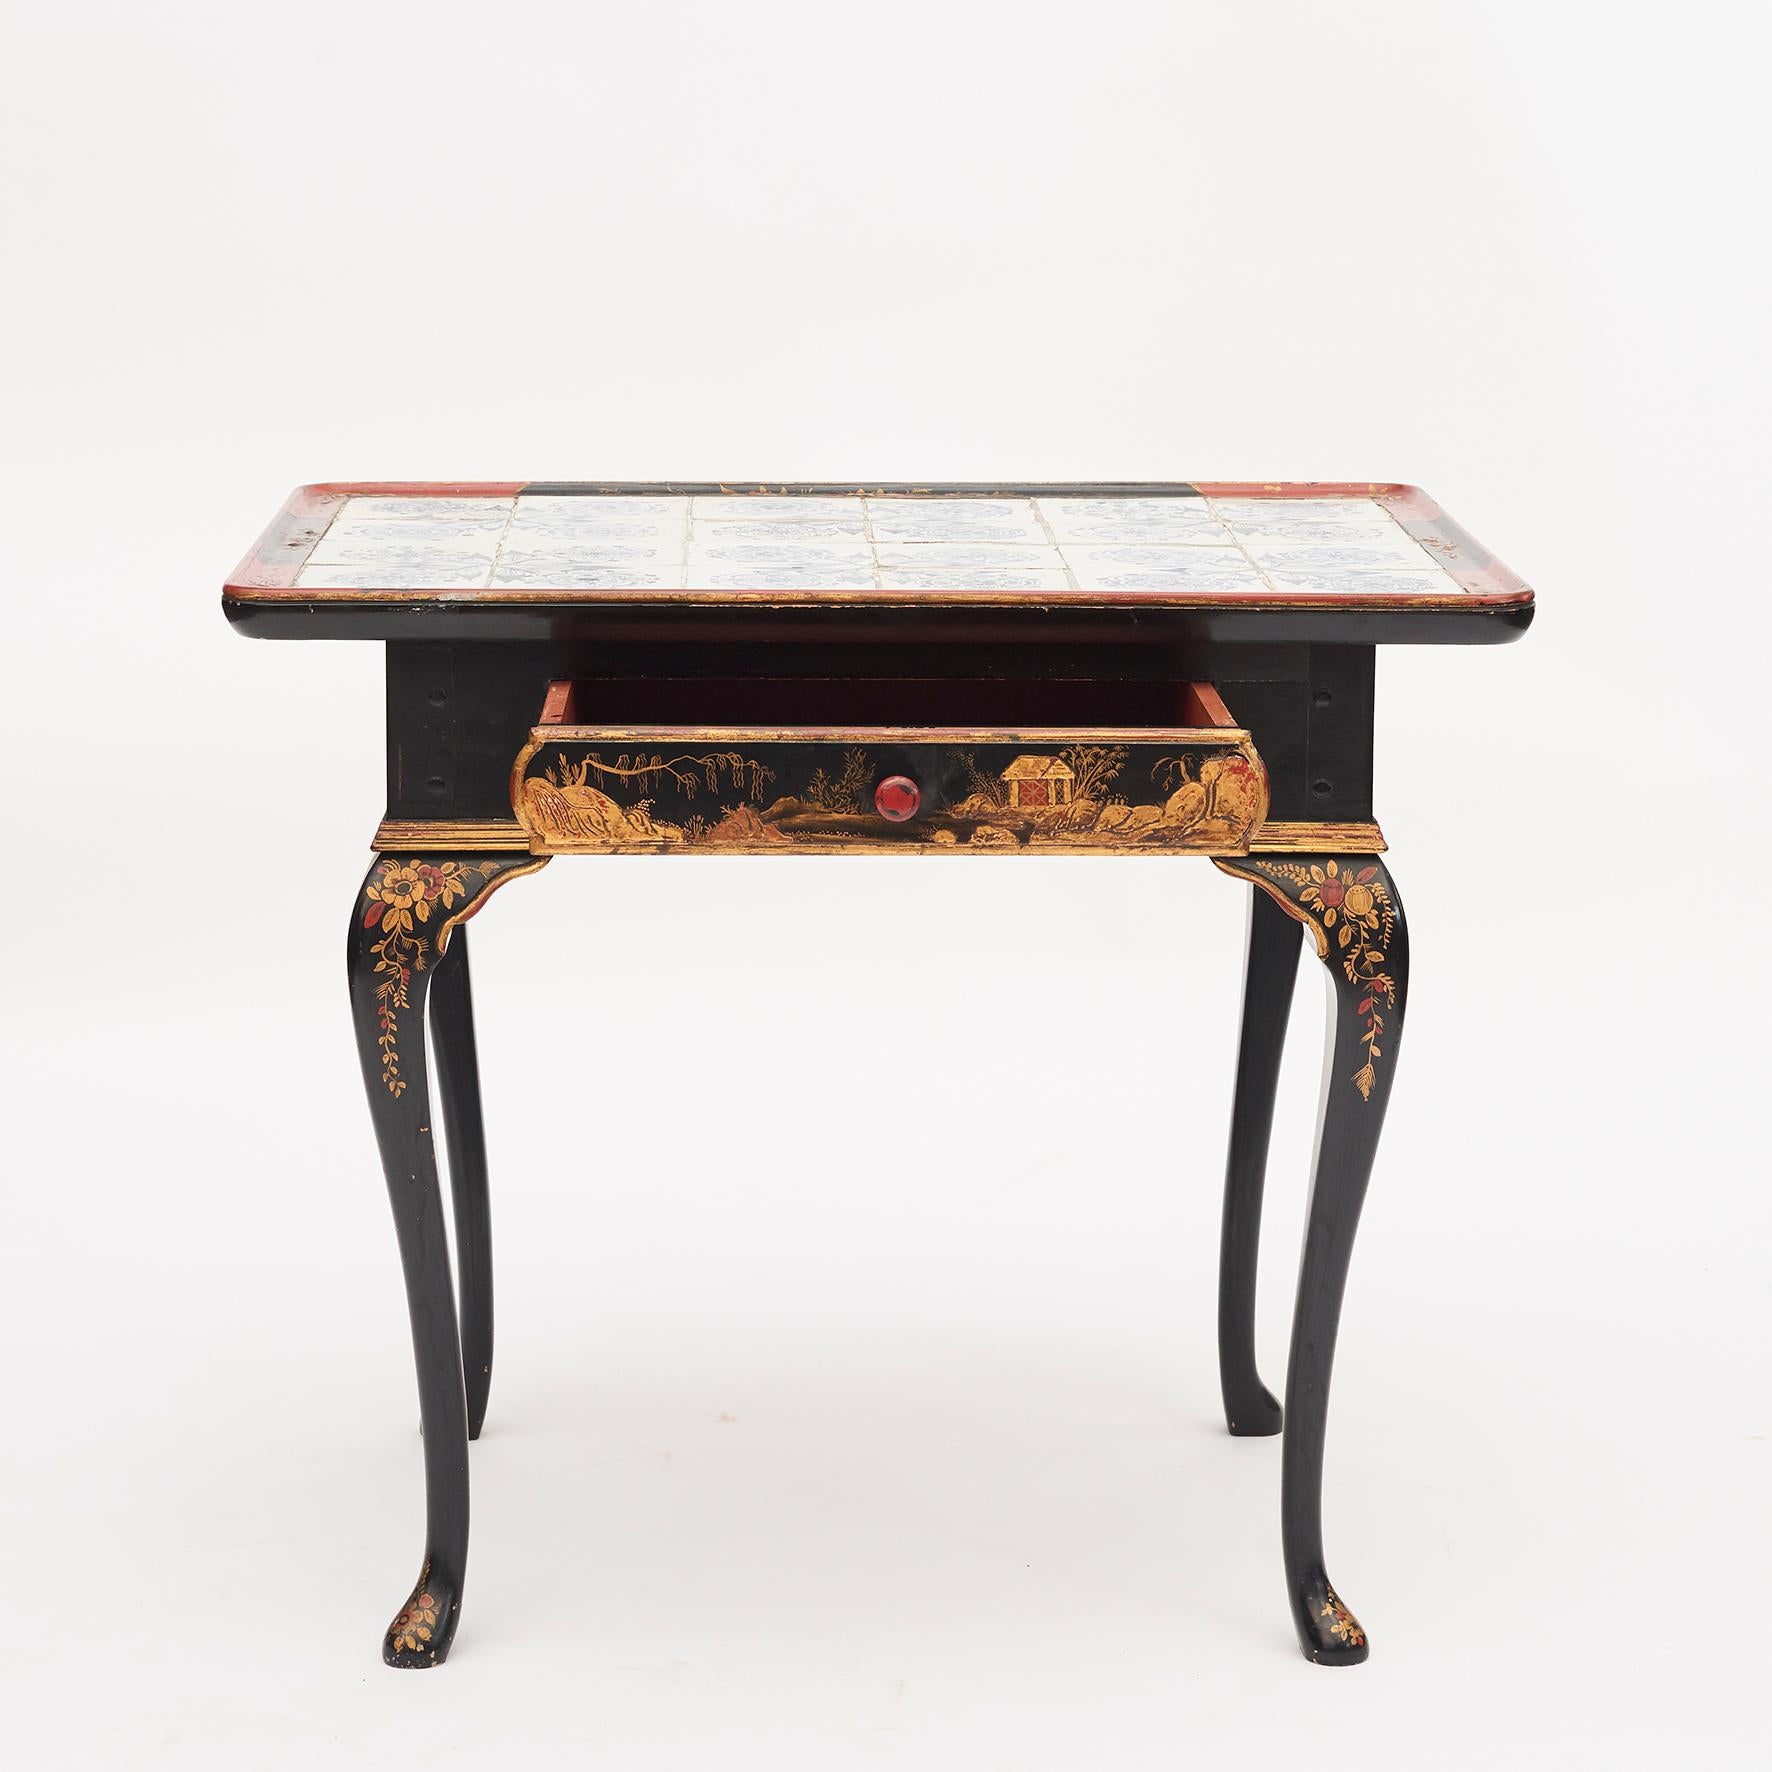 Rococo table decorated with tiles in blue decorations.
Restored mid-19th century. Painted and decorated with Chinese motifs.
Denmark approx. 1770 and 1870.